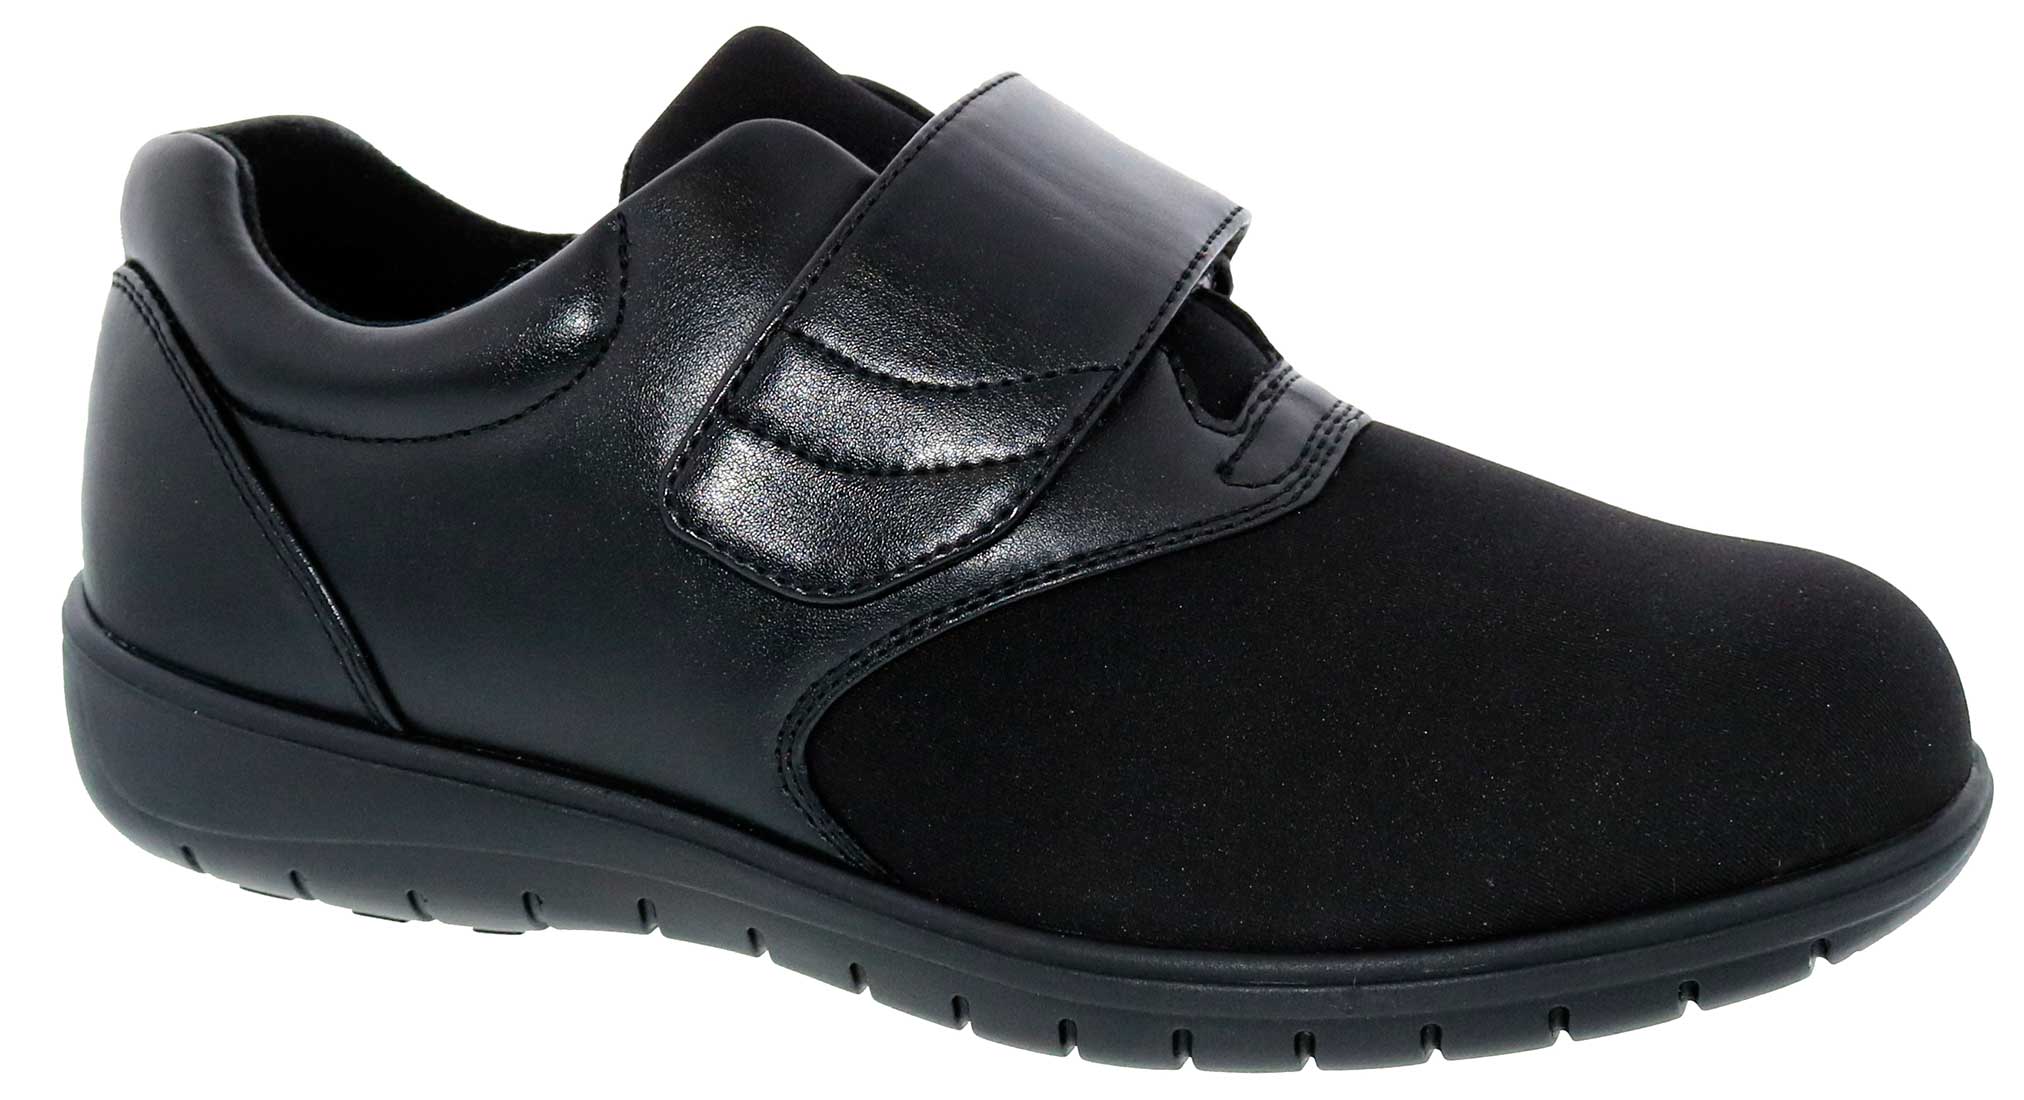 Footsaver Shoes Rascal 94885 - Men's Casual Comfort Therapeutic Diabetic Shoe - Extra Depth For Orthotics